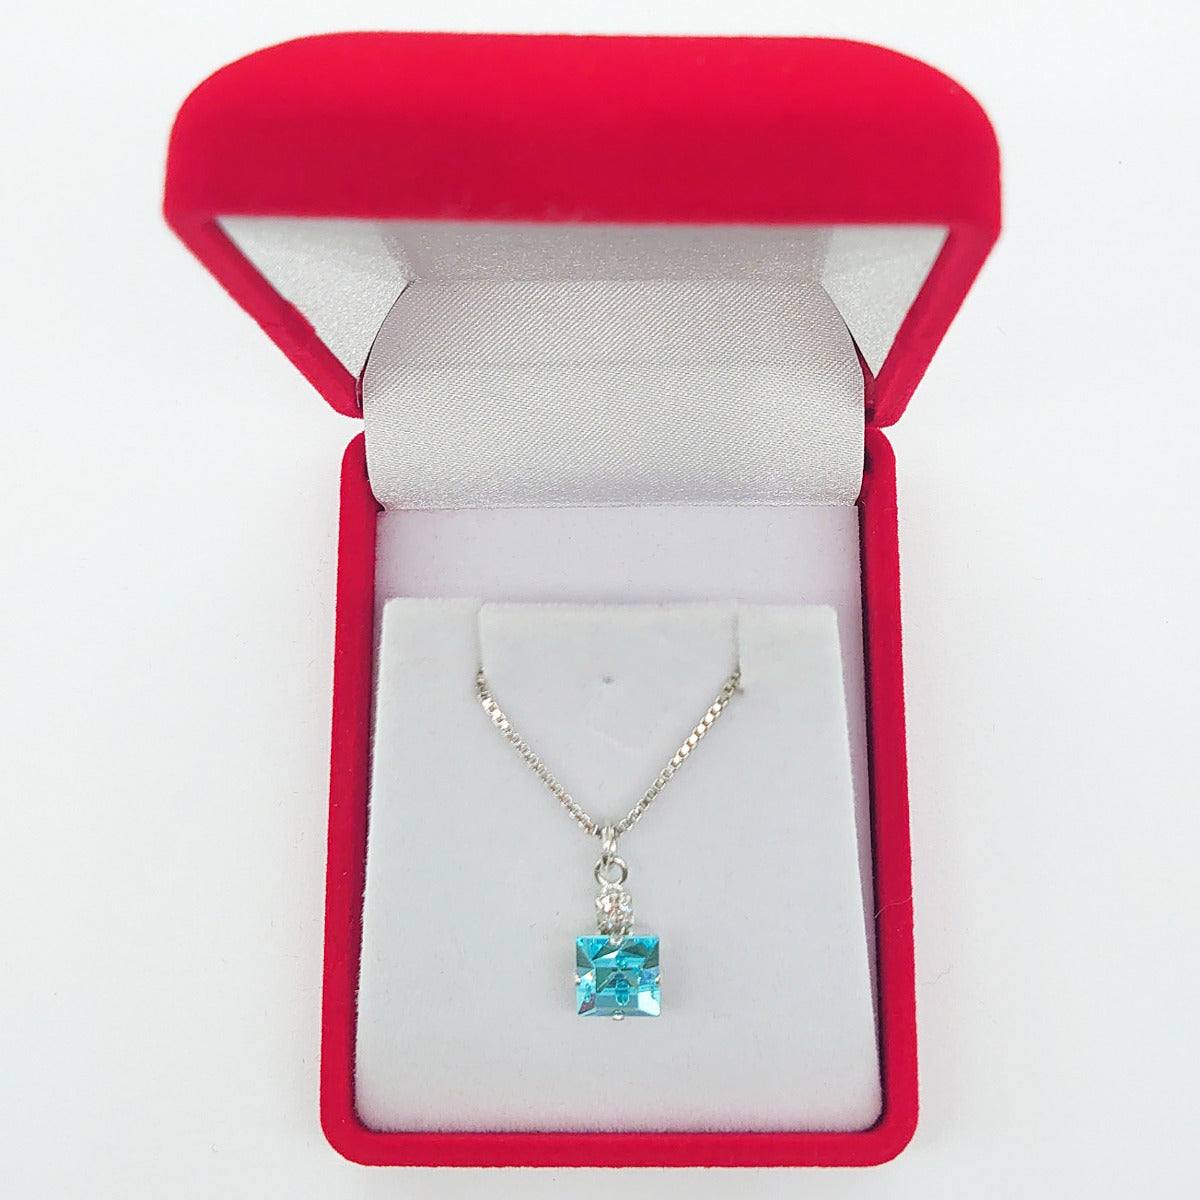 Small Swarovski Crystals Square Pendant With Silver Fittings